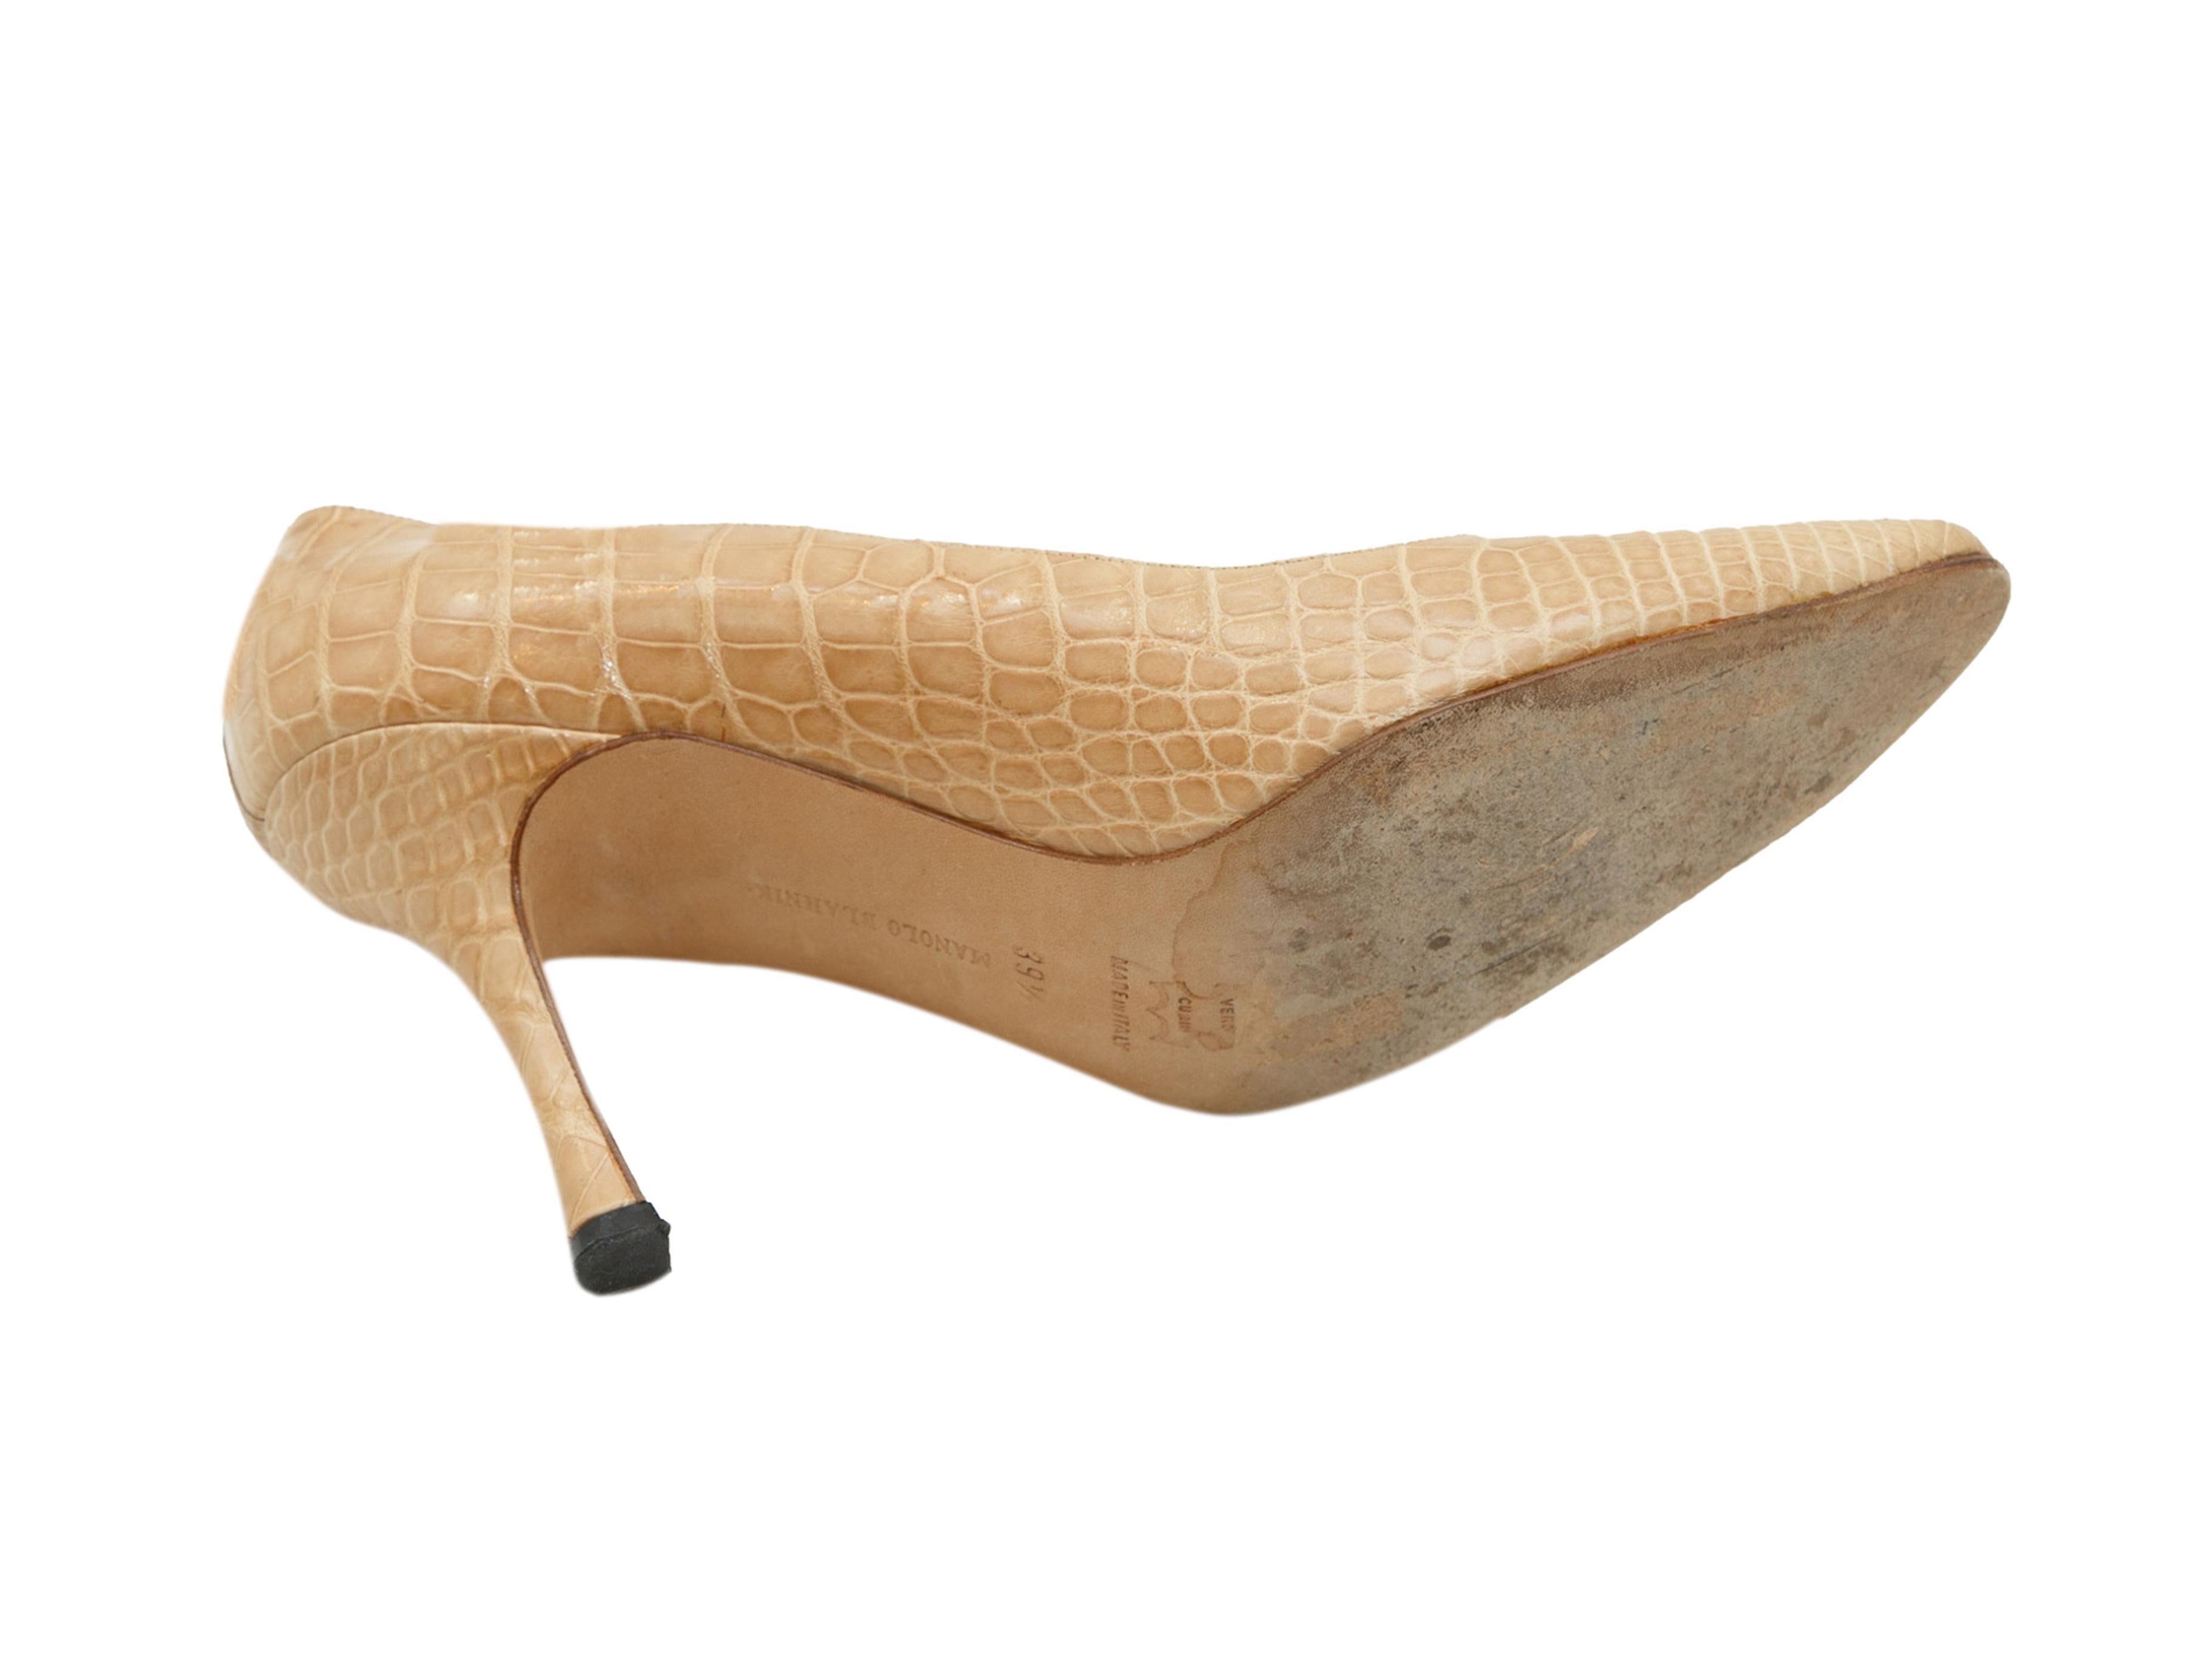 Product details: Tan alligator pumps by Manolo Blahnik. Slip-on style. Semi-pointed toes. Covered heels. Designer size IT39.5. 4